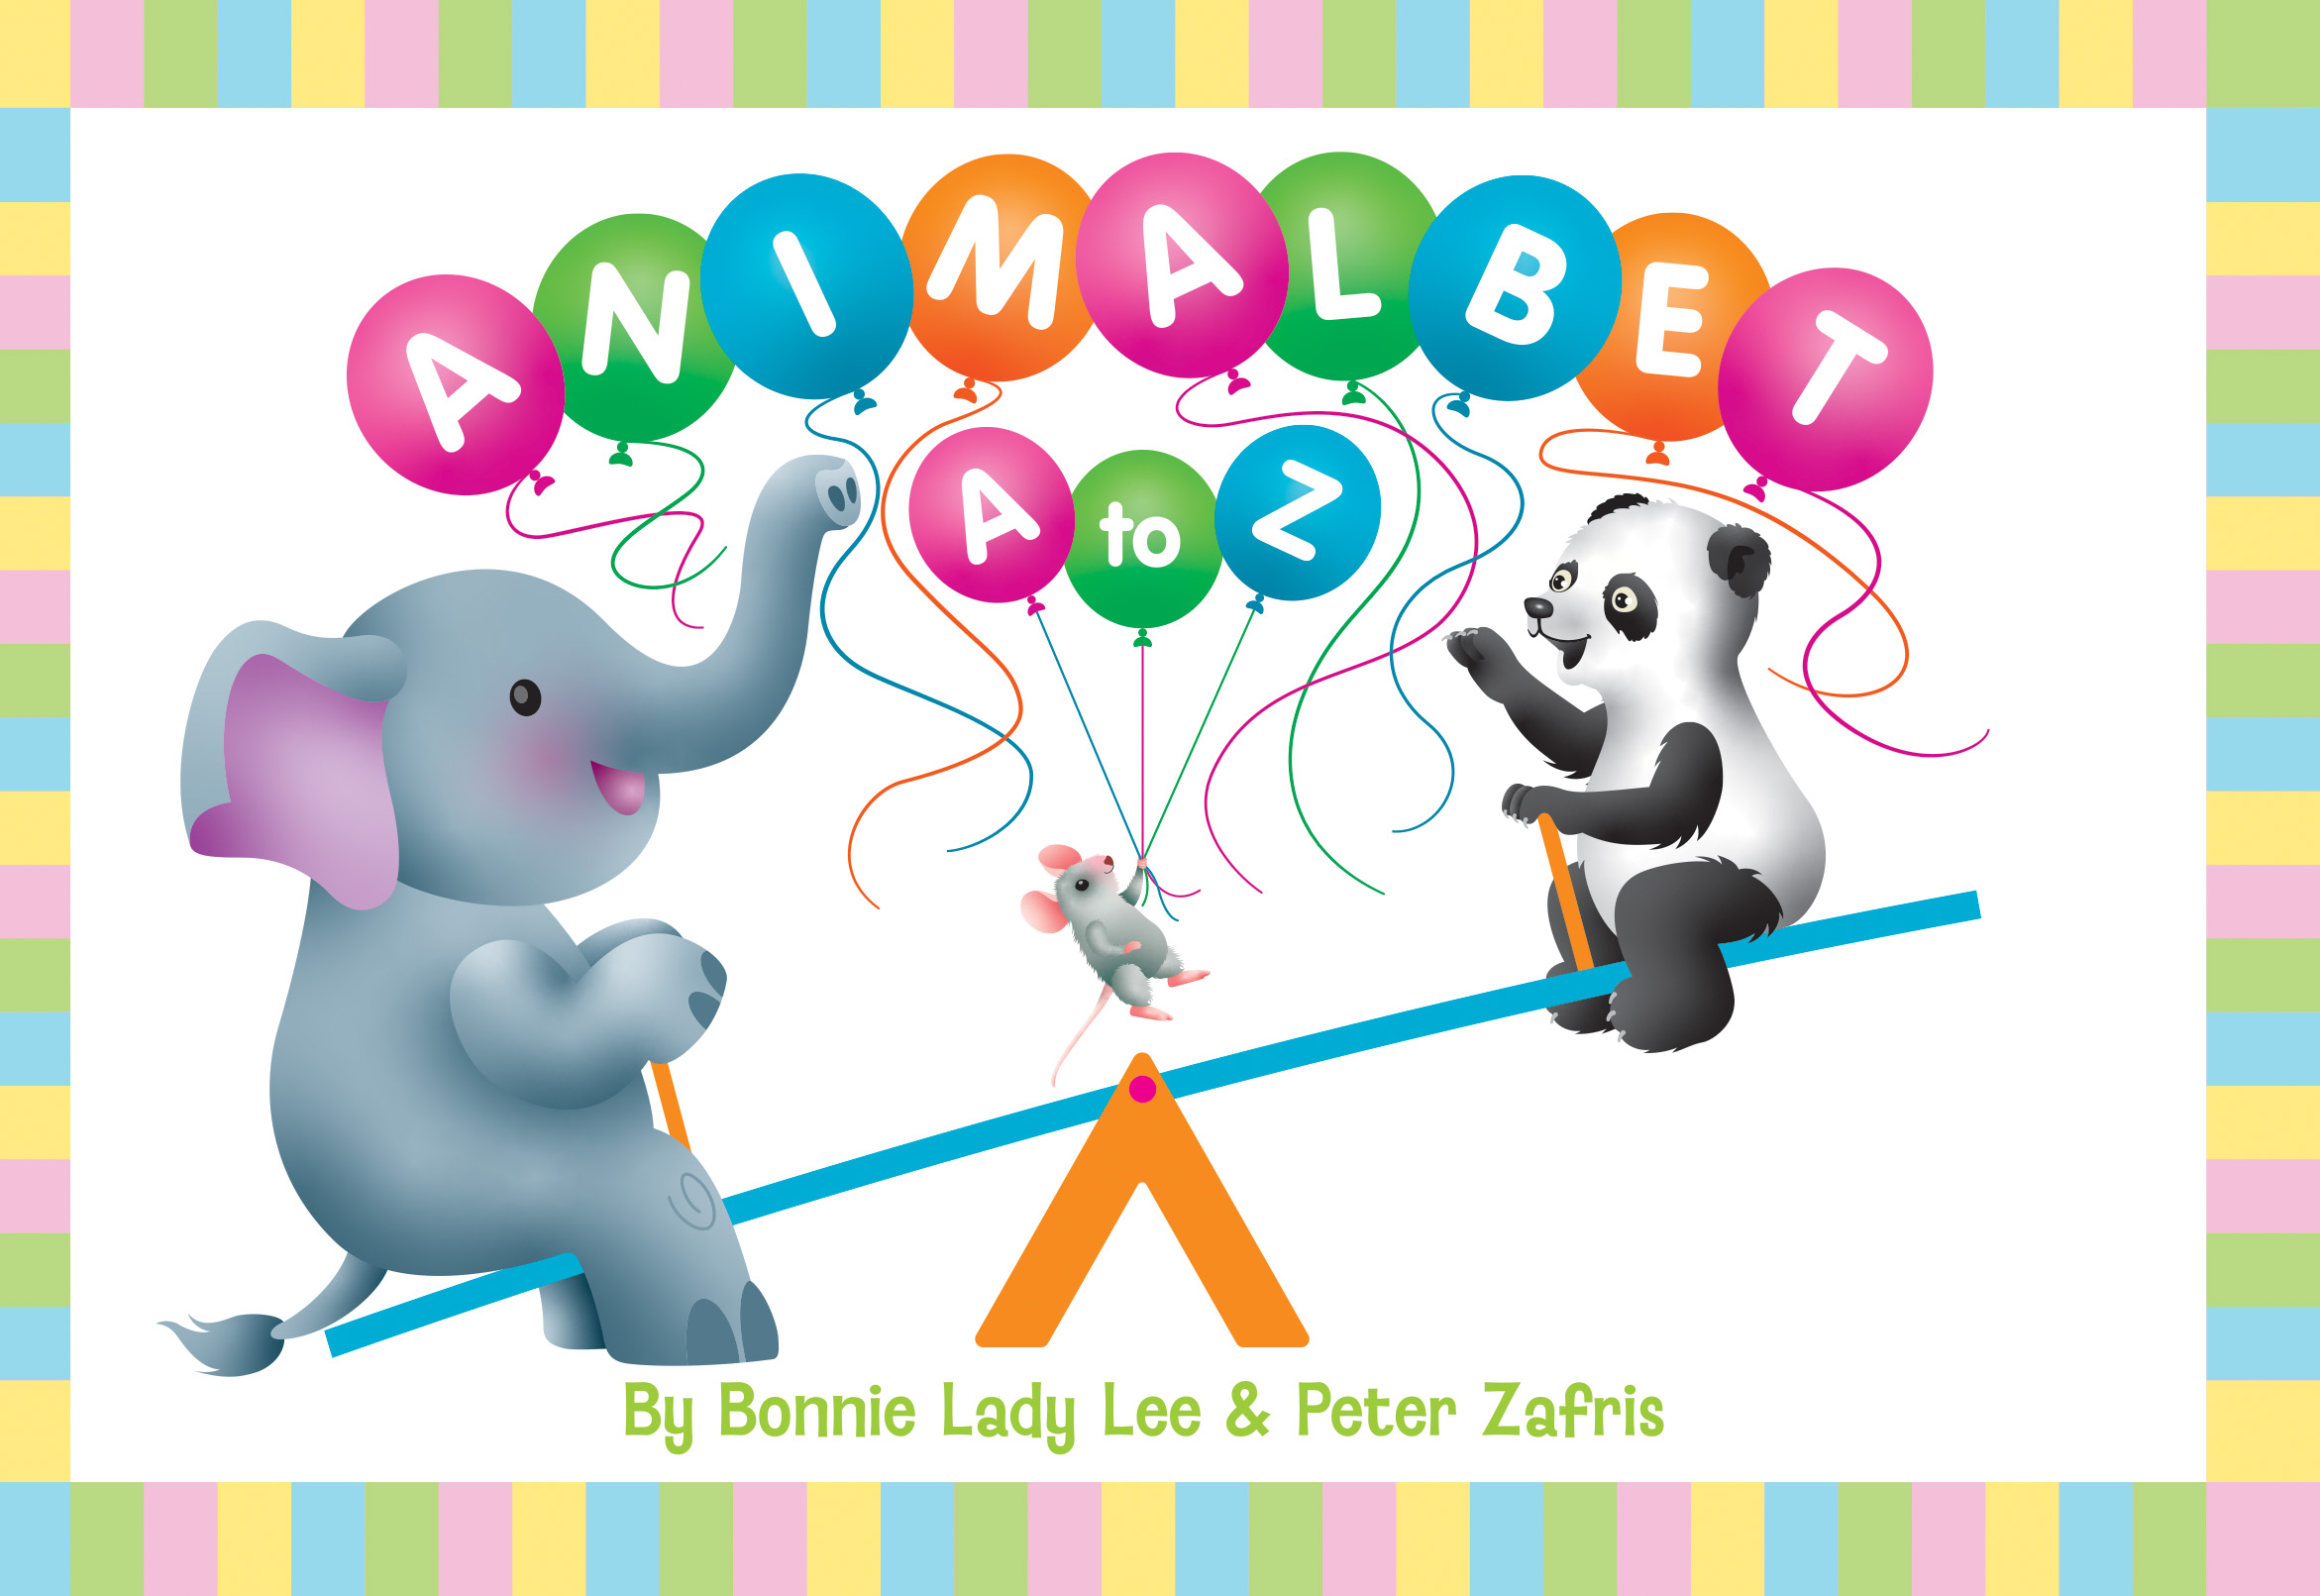 slide 1 ANIMALBET! A to Z, by Bonnie Lady Lee and Peter Zafris. ANIMALBET teaches you the A-B-C’s in a wild, animal-way. Board Book. Ages Baby to 3.